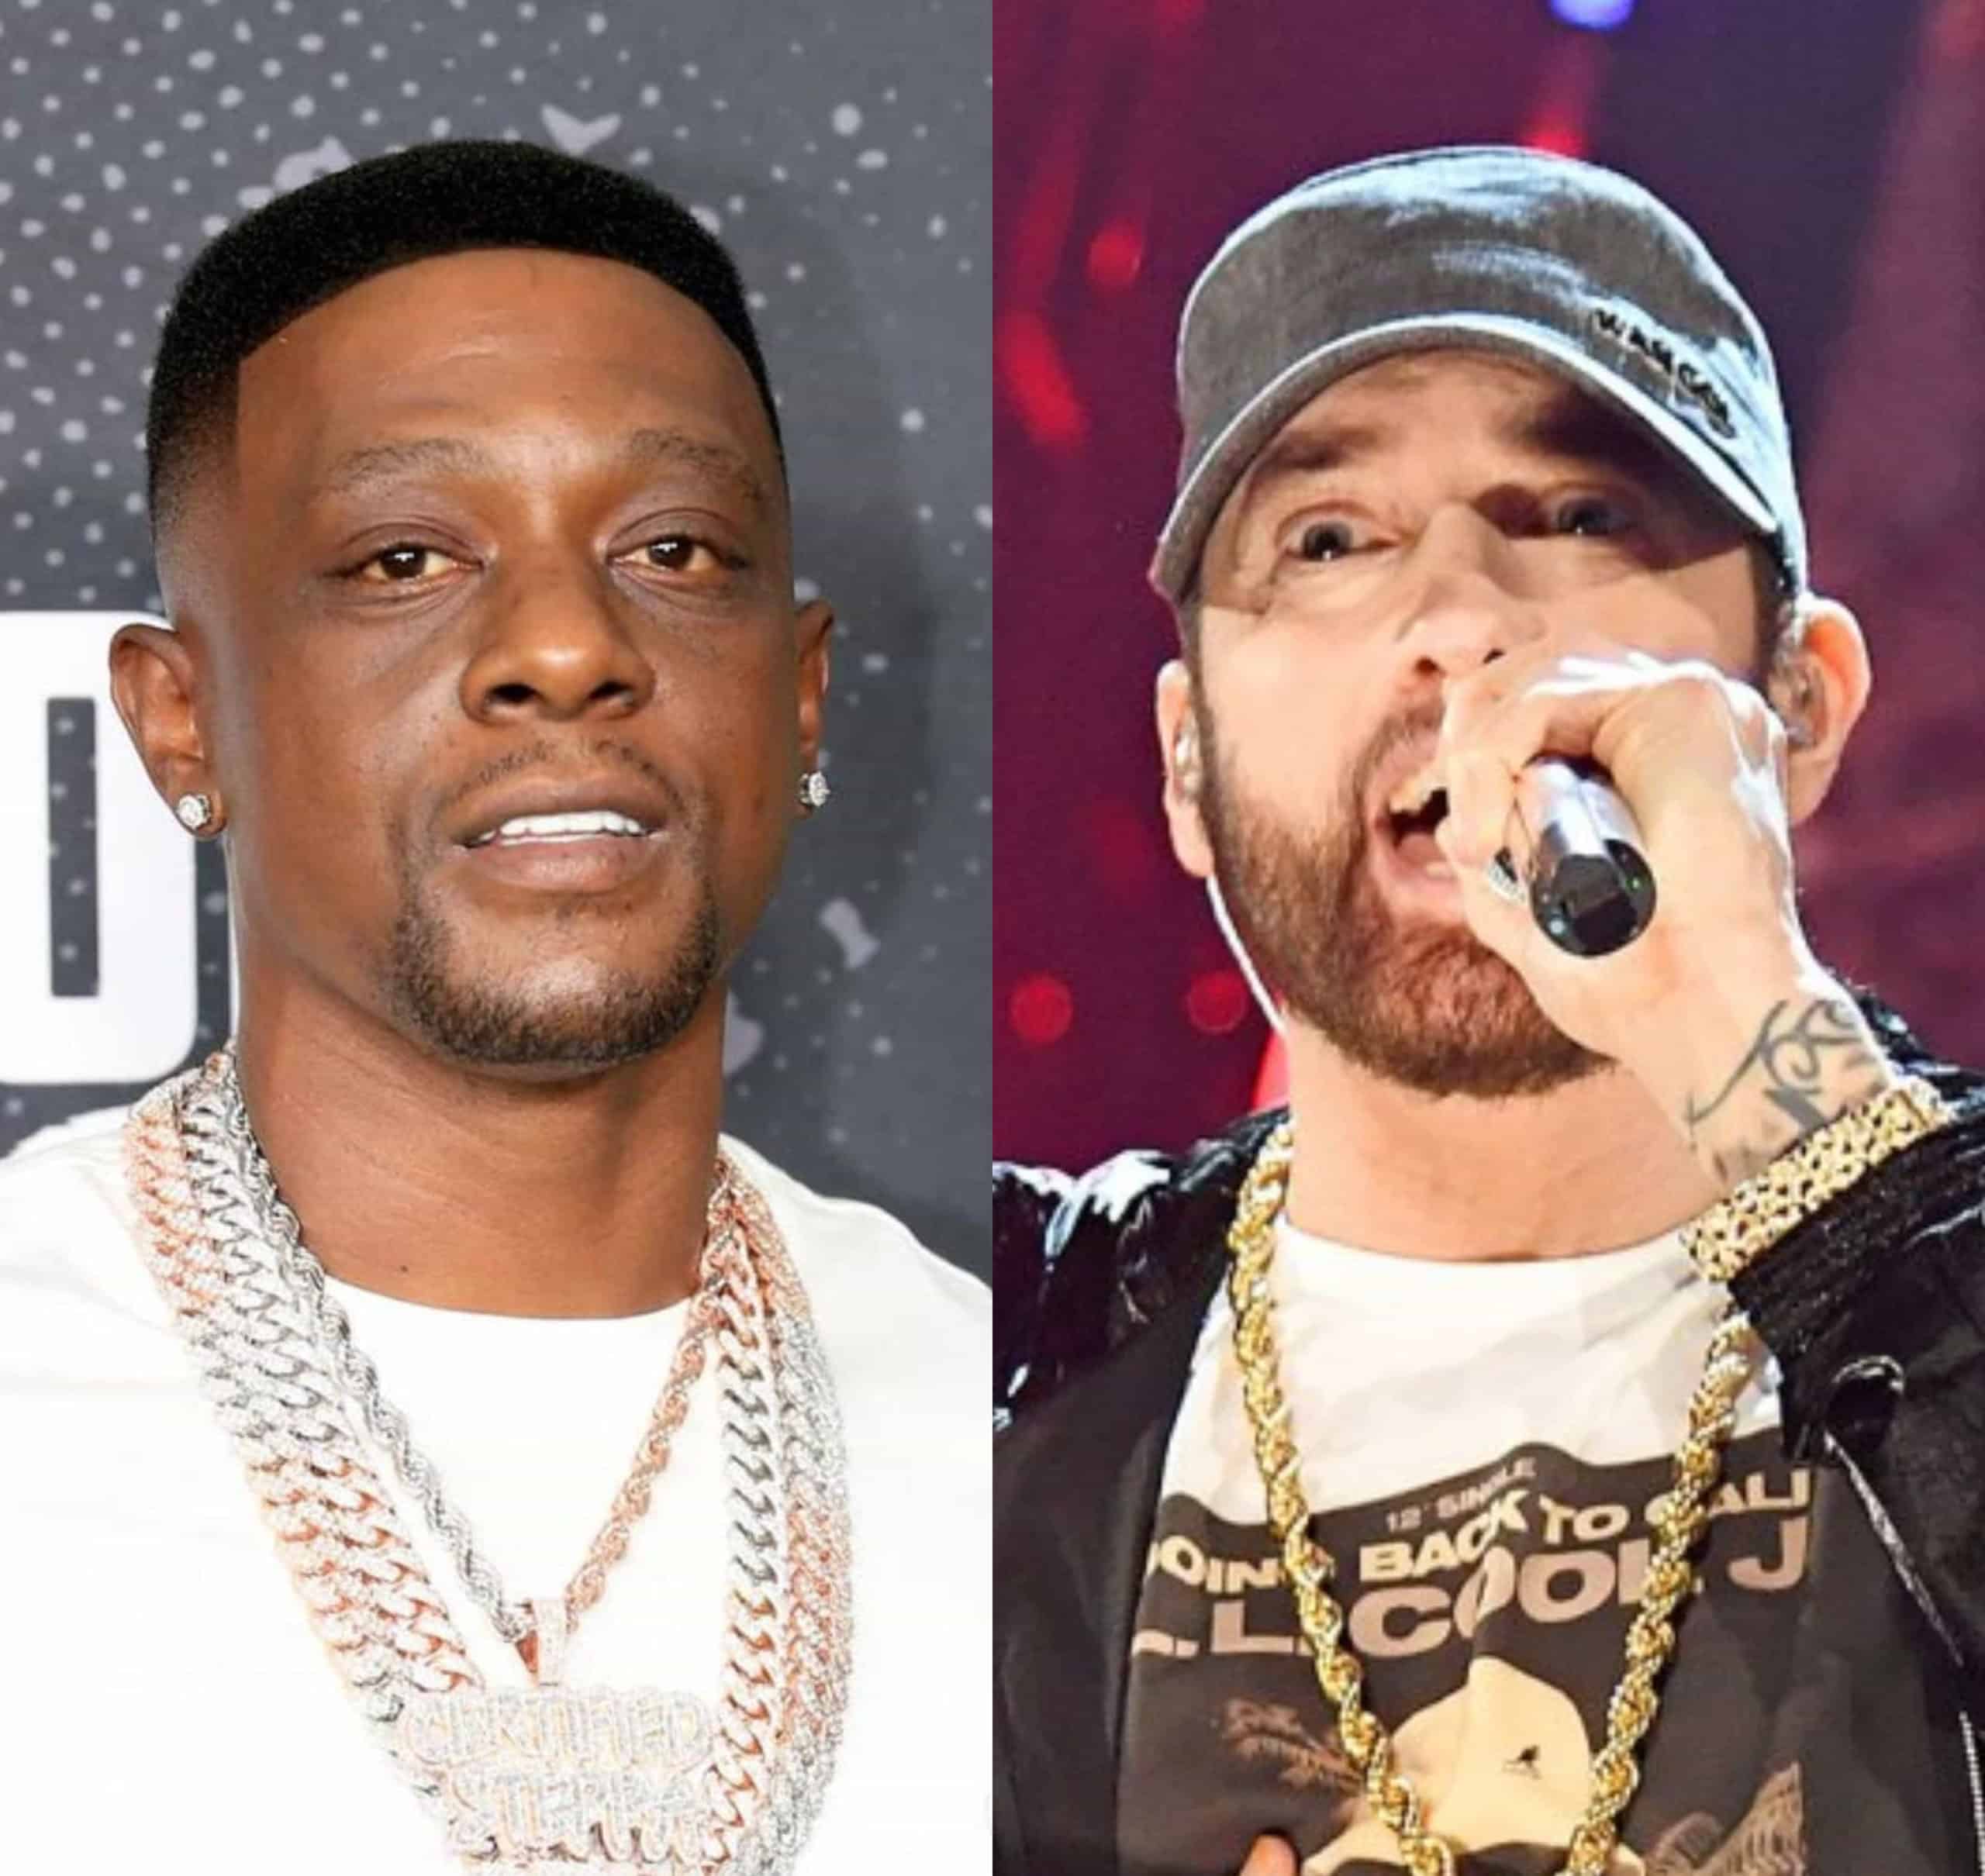 Boosie Badazz Praises Eminem For Taking A Knee At Super Bowl: "He's A Stand-Up Guy"